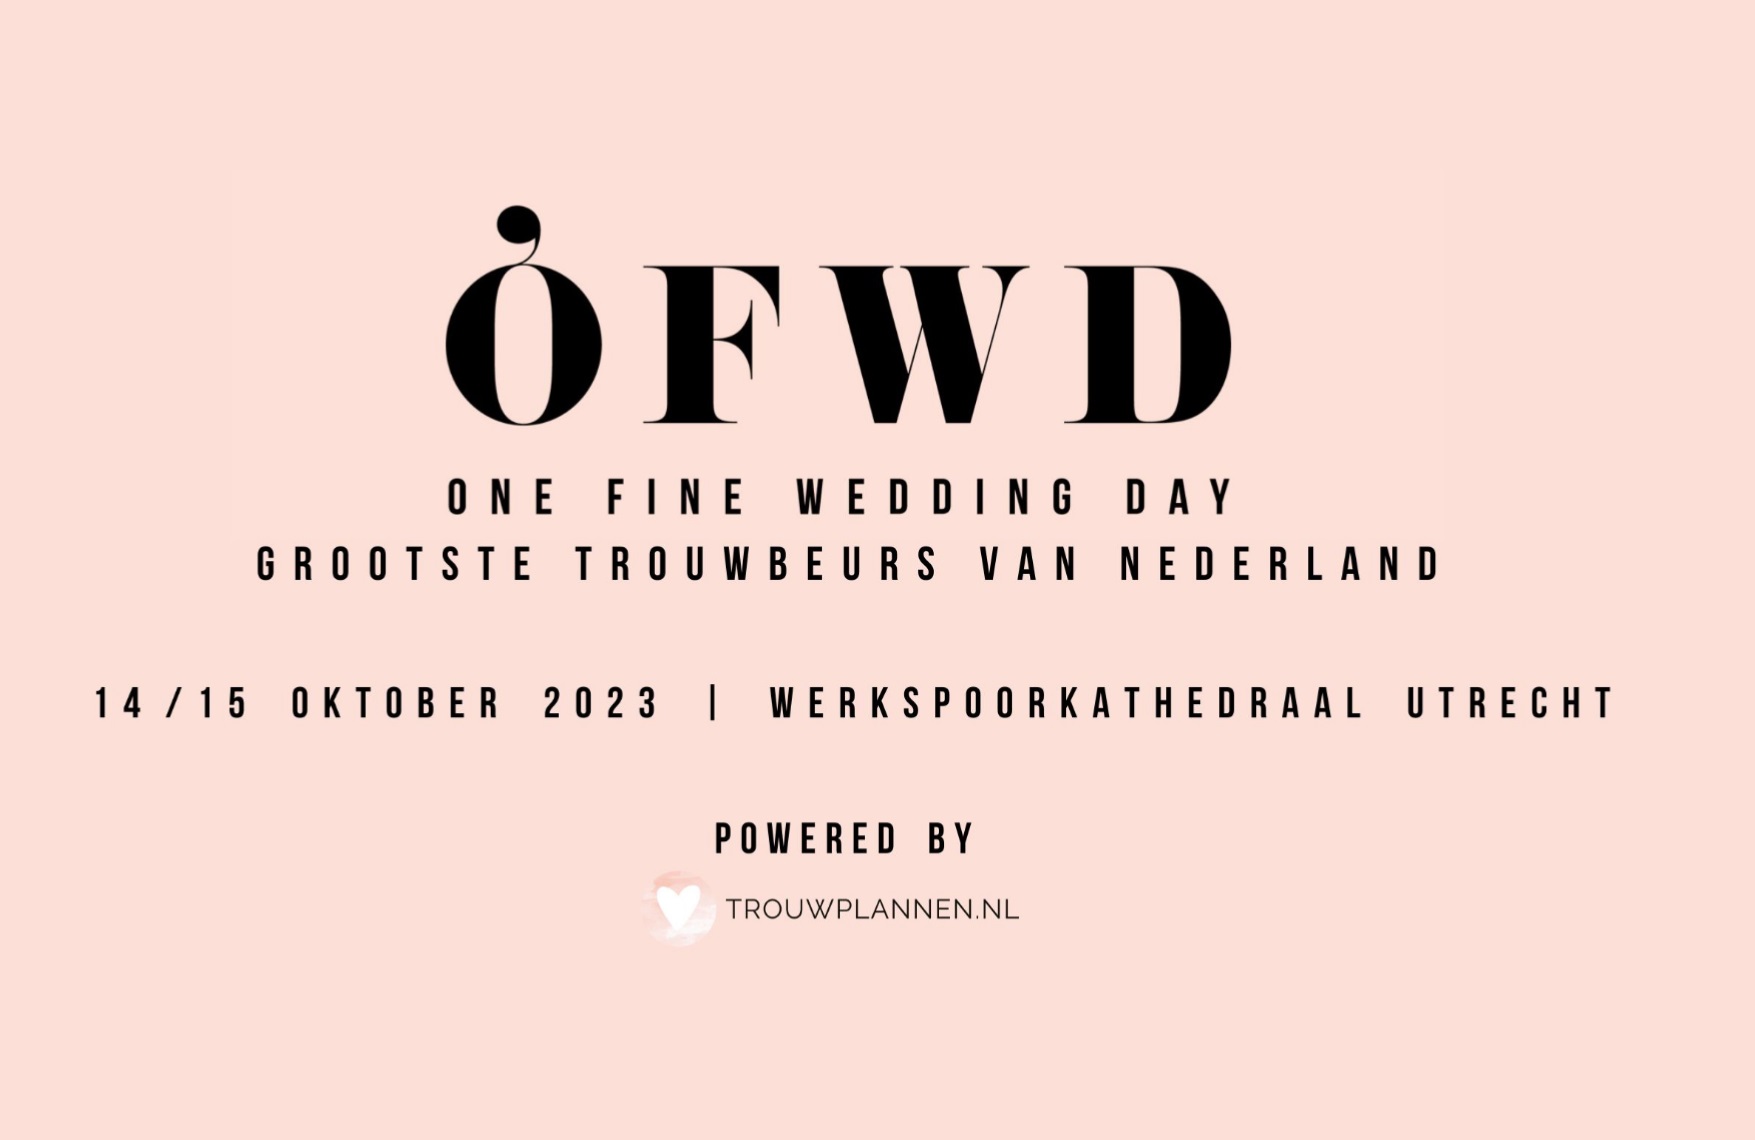 trouwbeurs One fine wedding day beurs